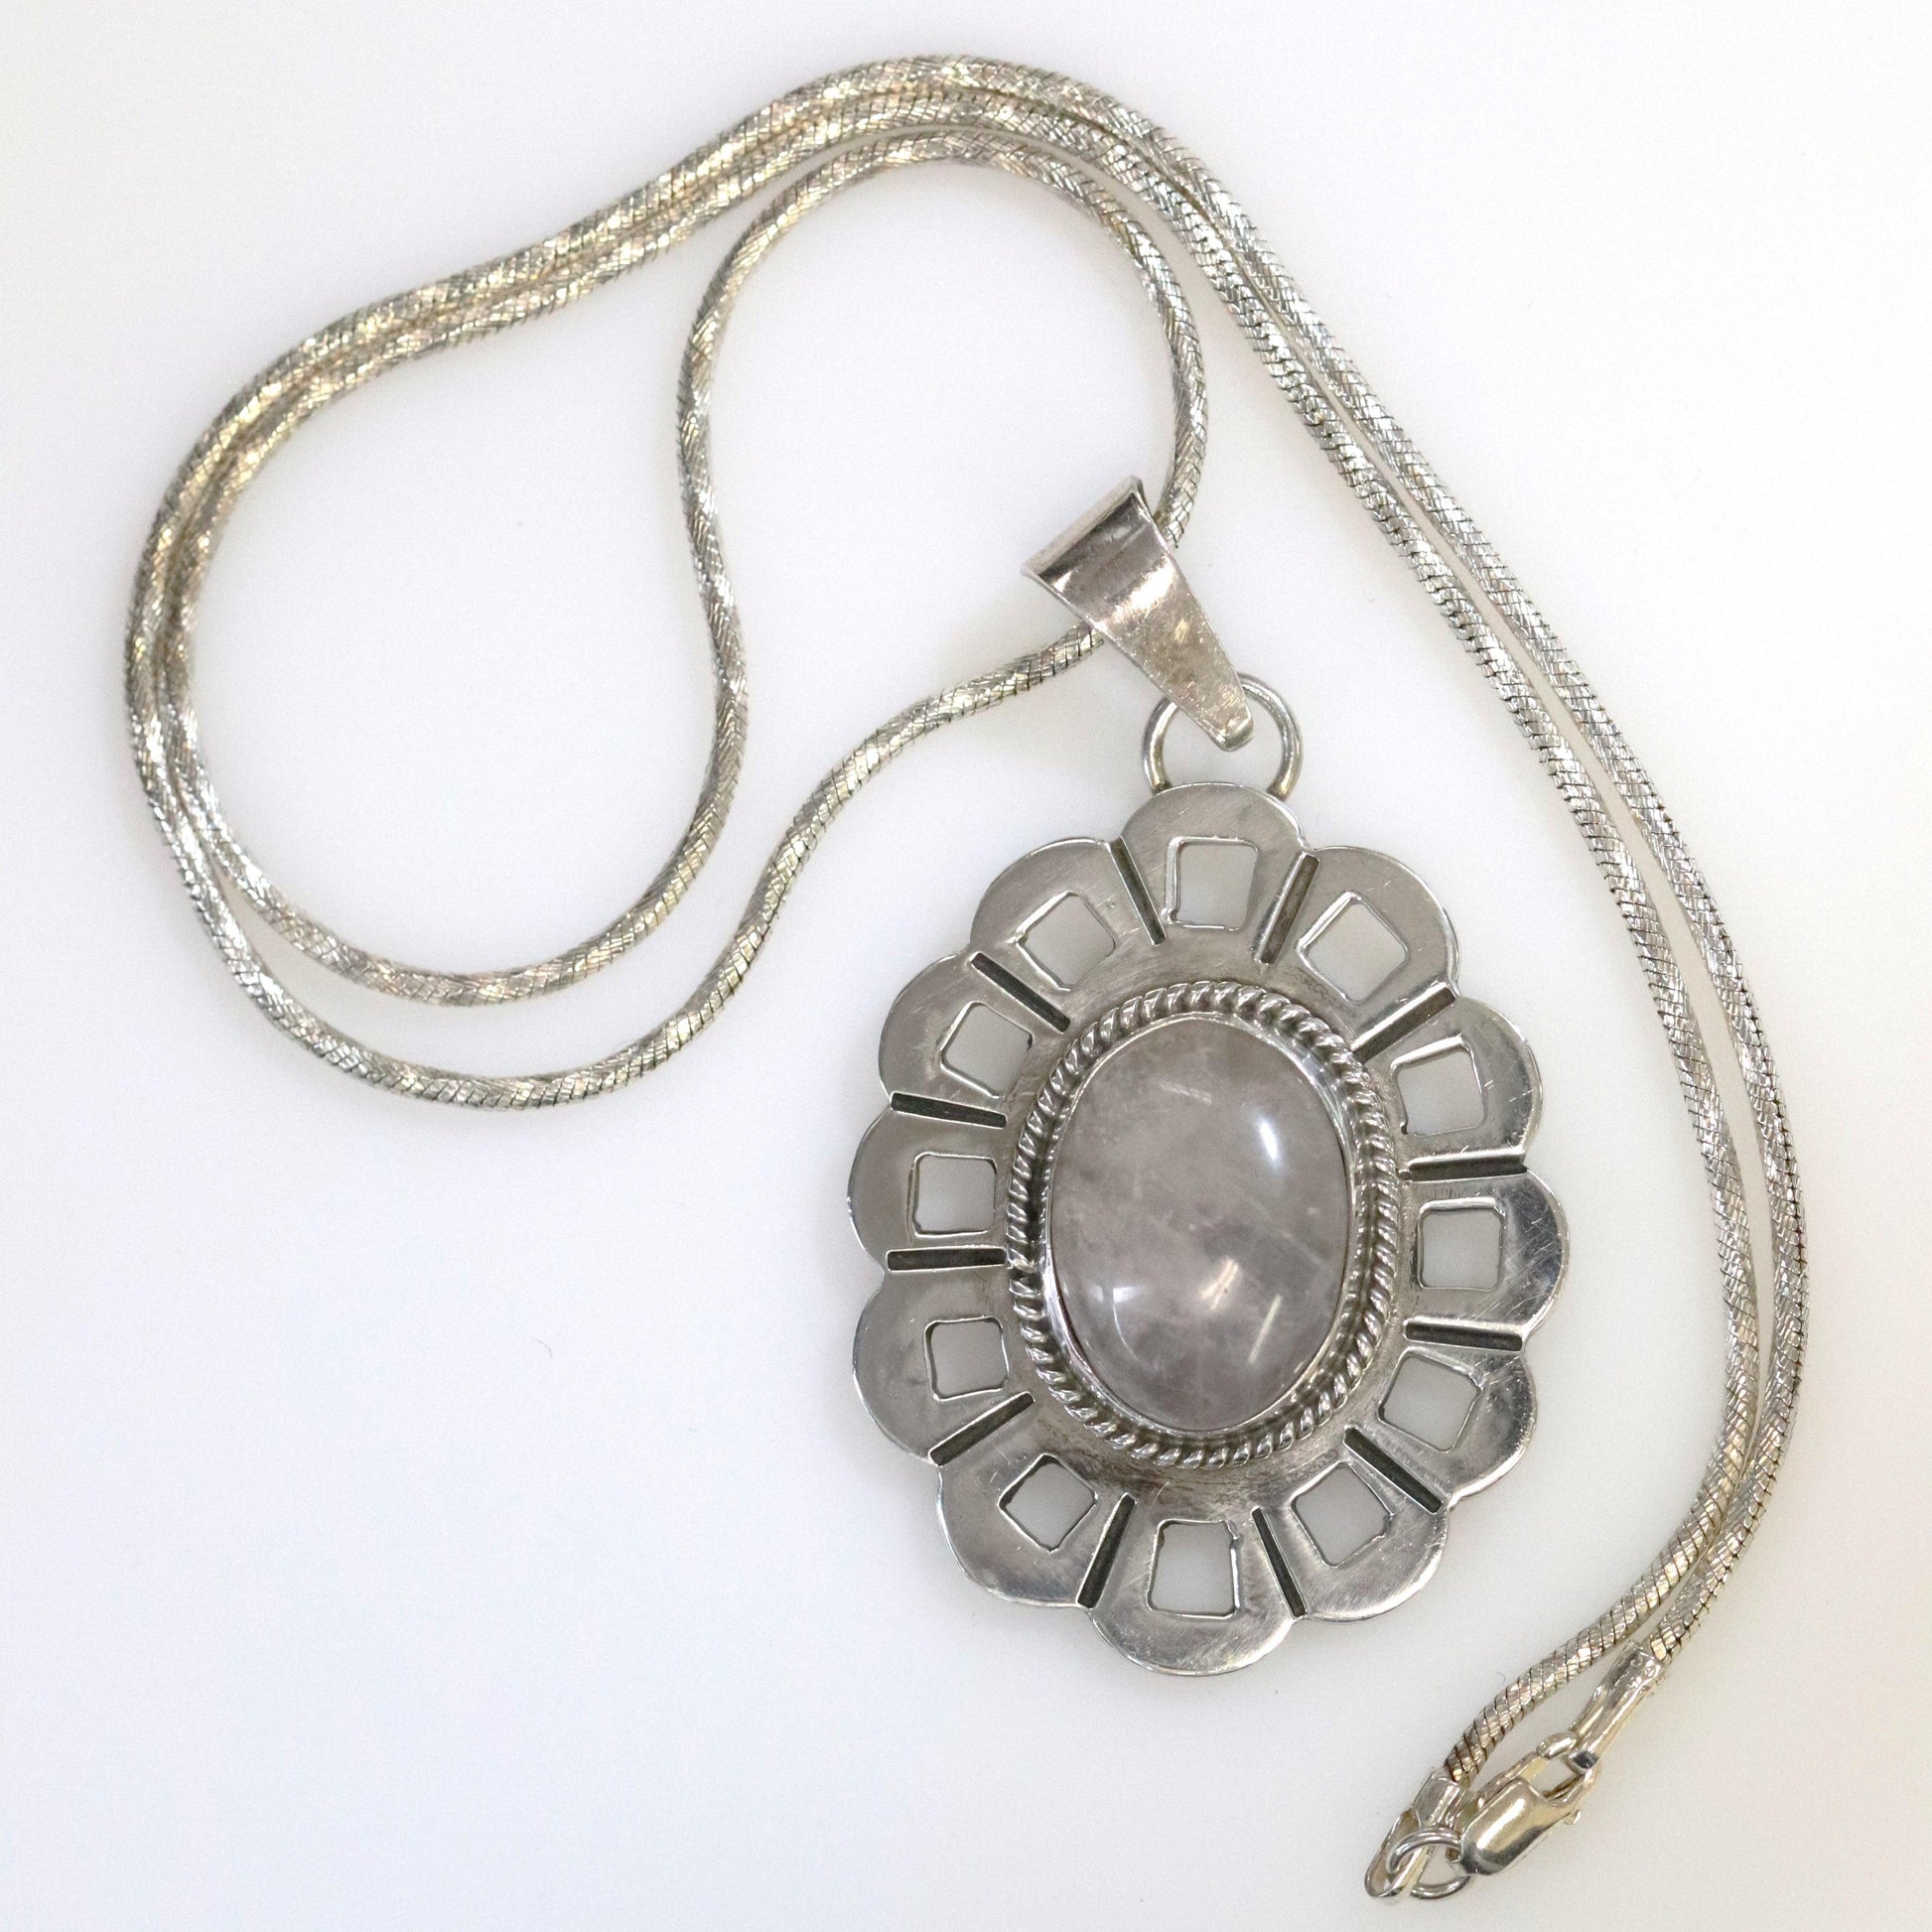 Vintage Taxco Silver Mexican Jewelry | Rose Quartz Handcrafted Pendant Mexico - Carmel Fine Silver Jewelry